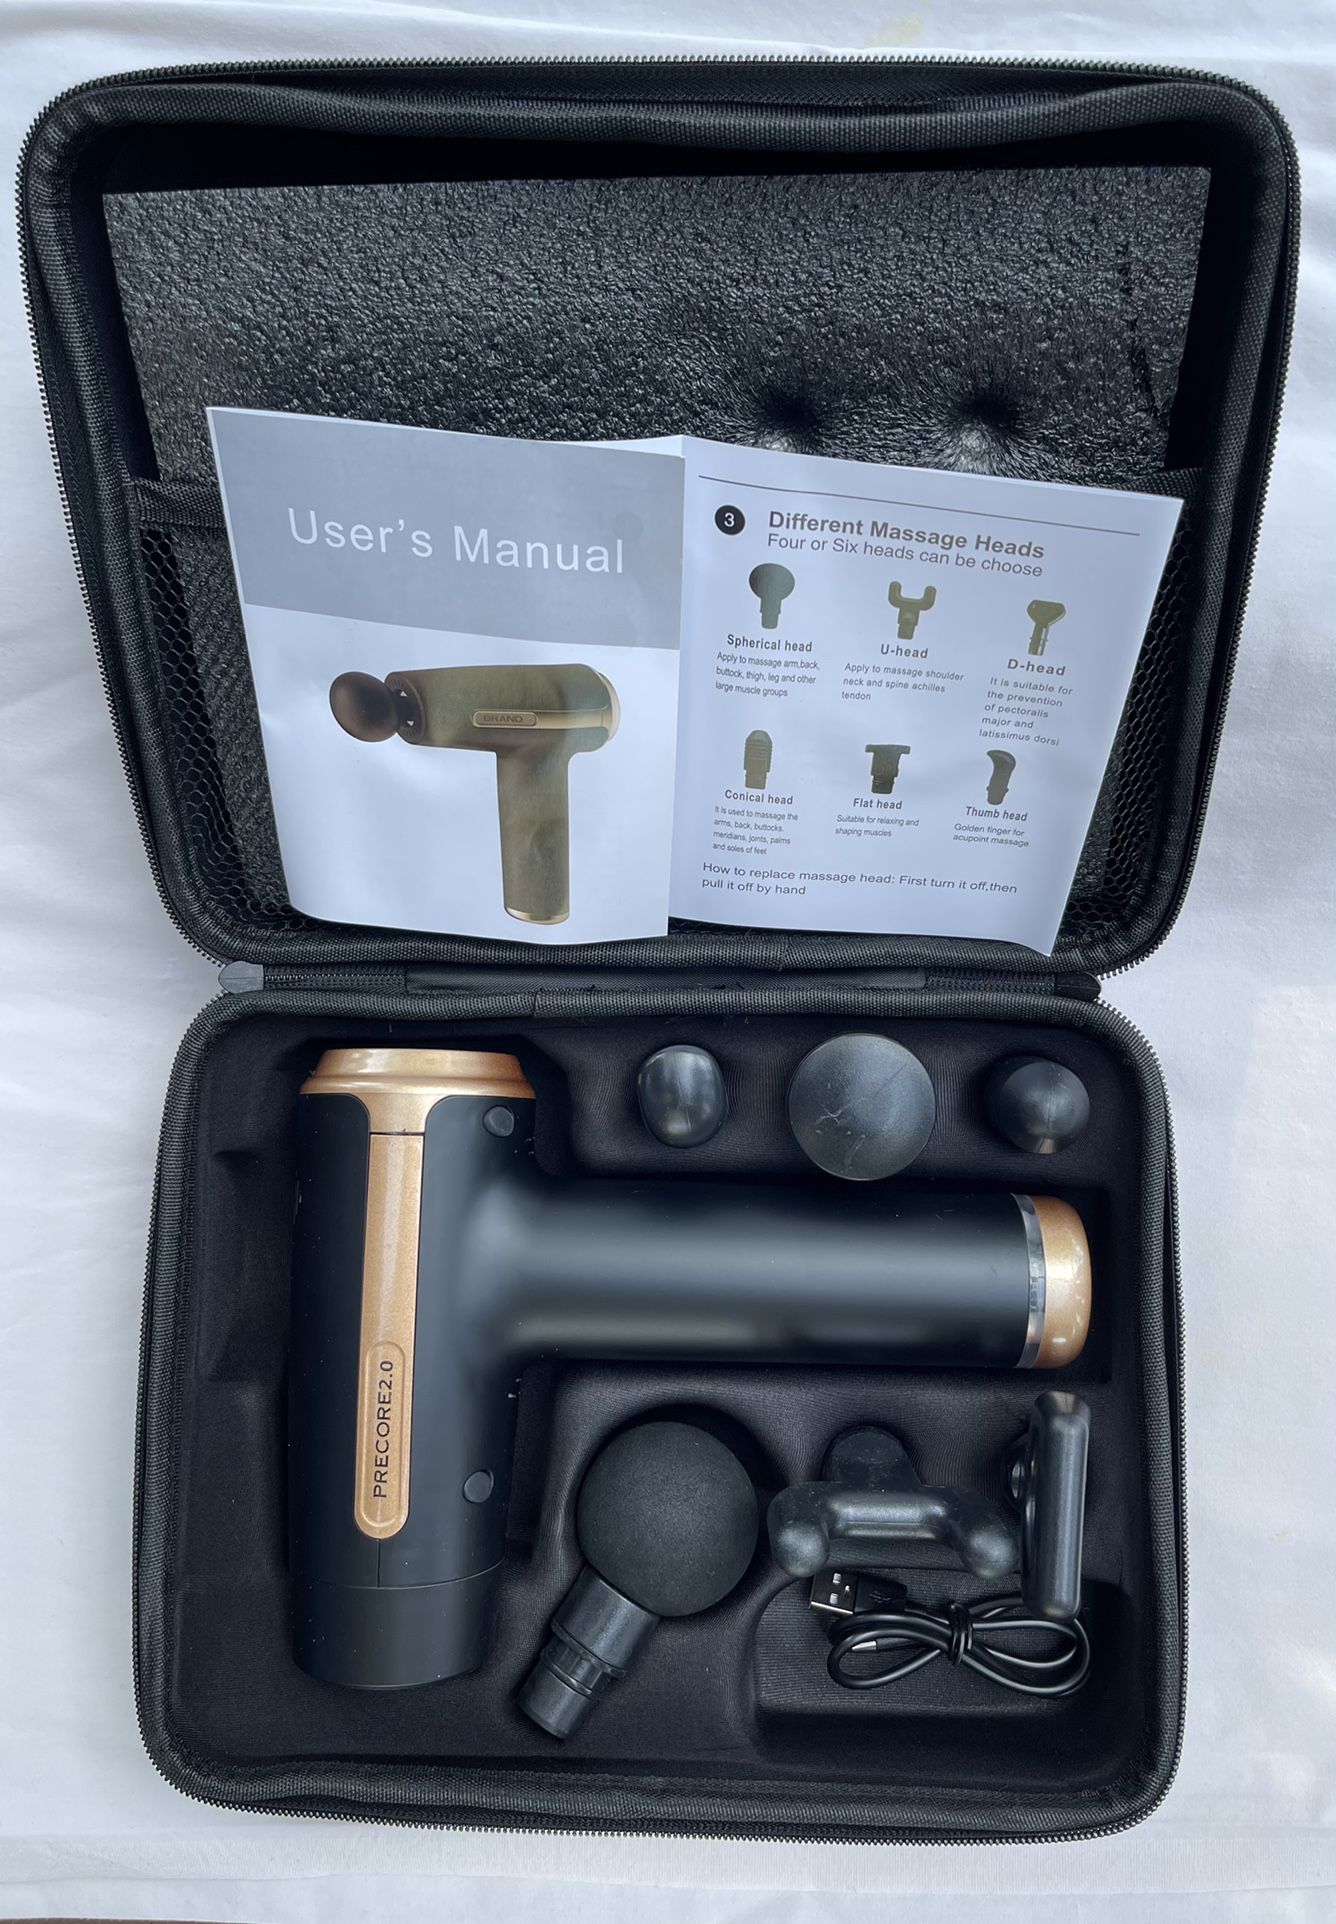 Massage Gun Precore2.0 for Athletes Performance using innovative technology and design features, 20 speed 6 heads body Massage gun percussion massager